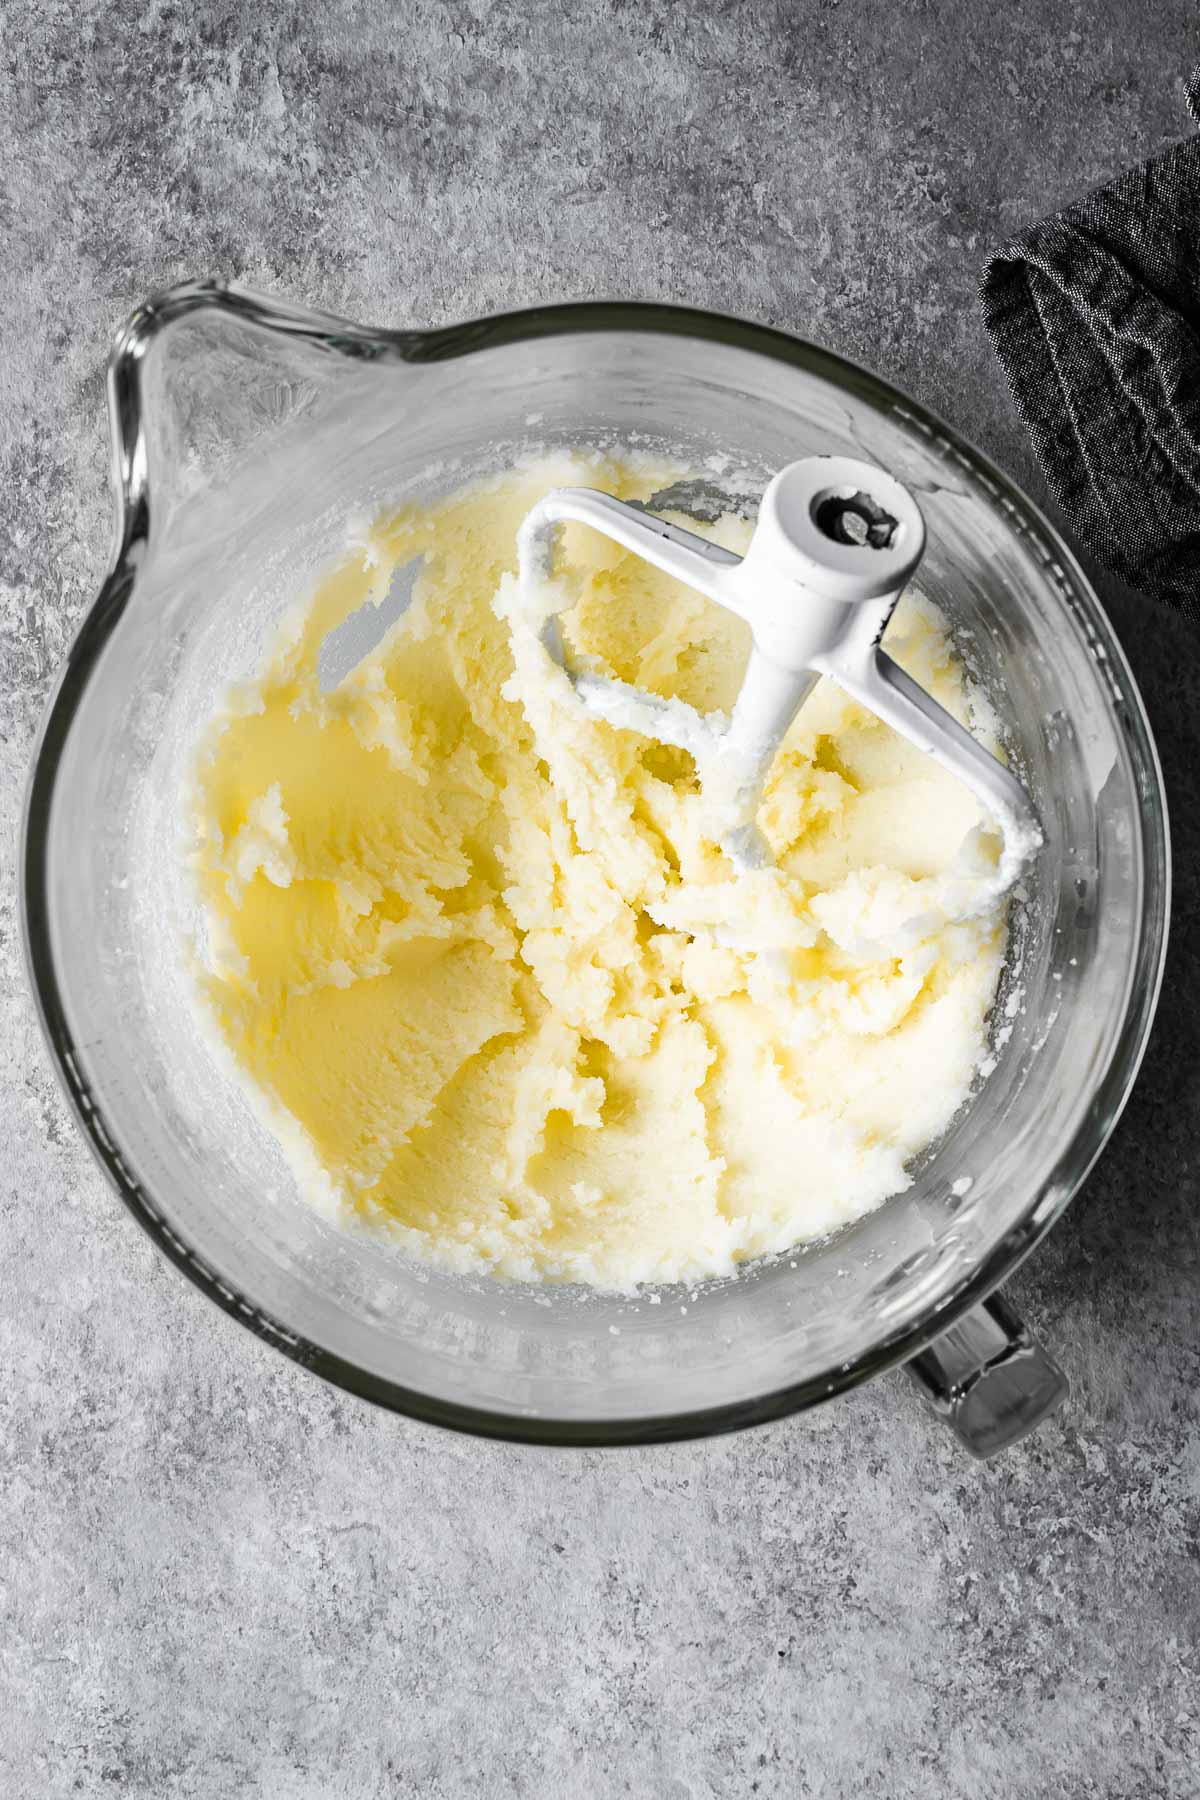 Creamed butter and sugar in a glass mixing bowl.